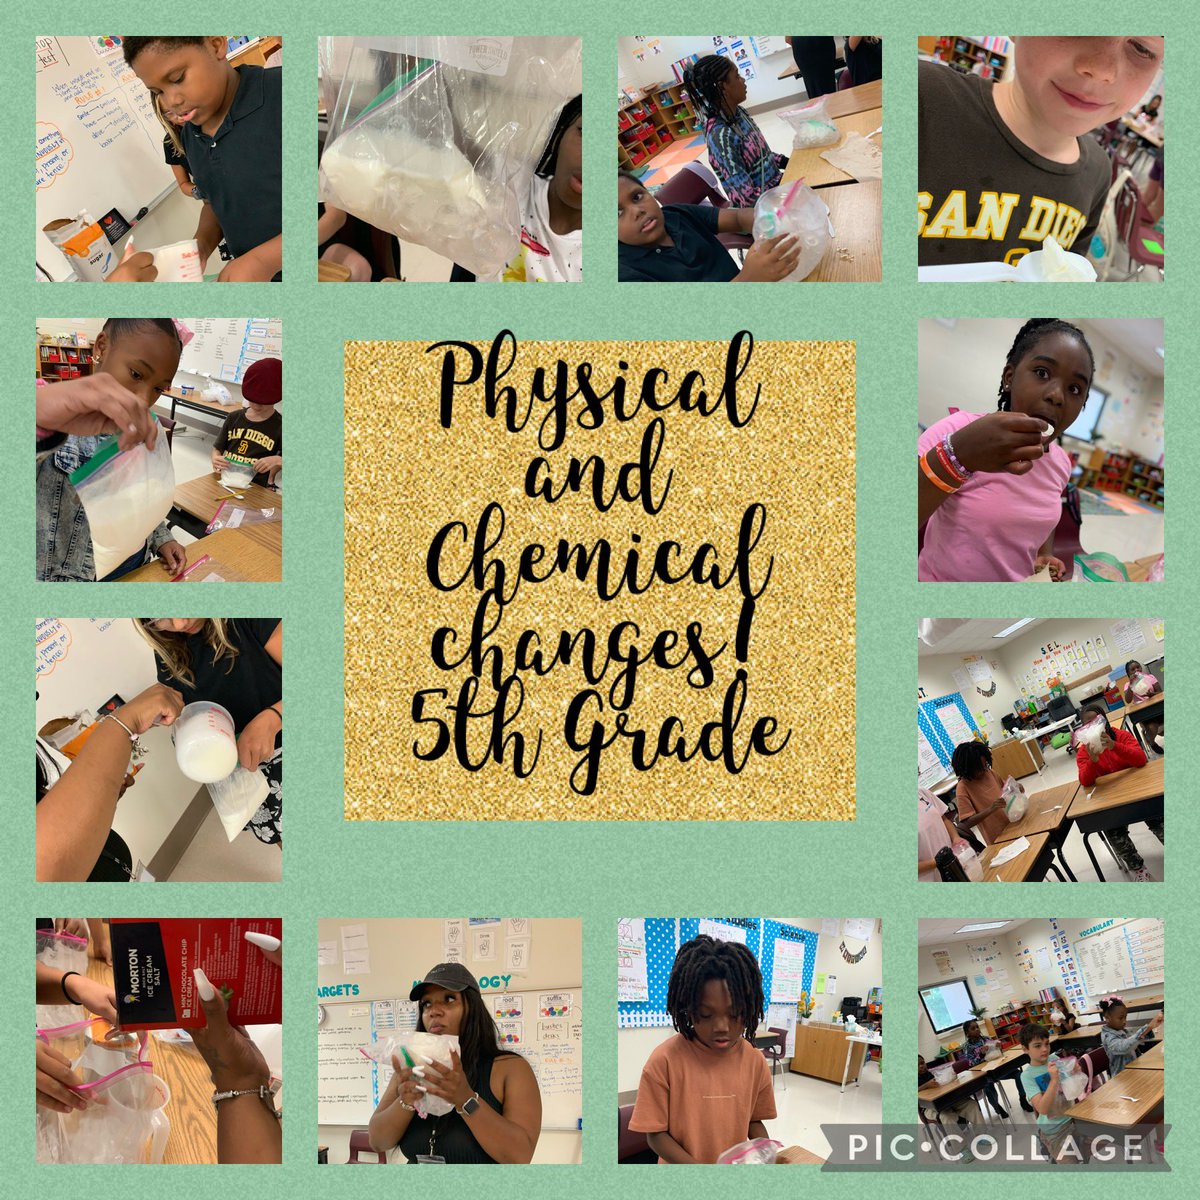 Everyone knows that’s hands on science is the way to keep our scholars engaged! #handsonscience #5thgraderocks @IBinAPS @APSscience @PaulWBrownAPS